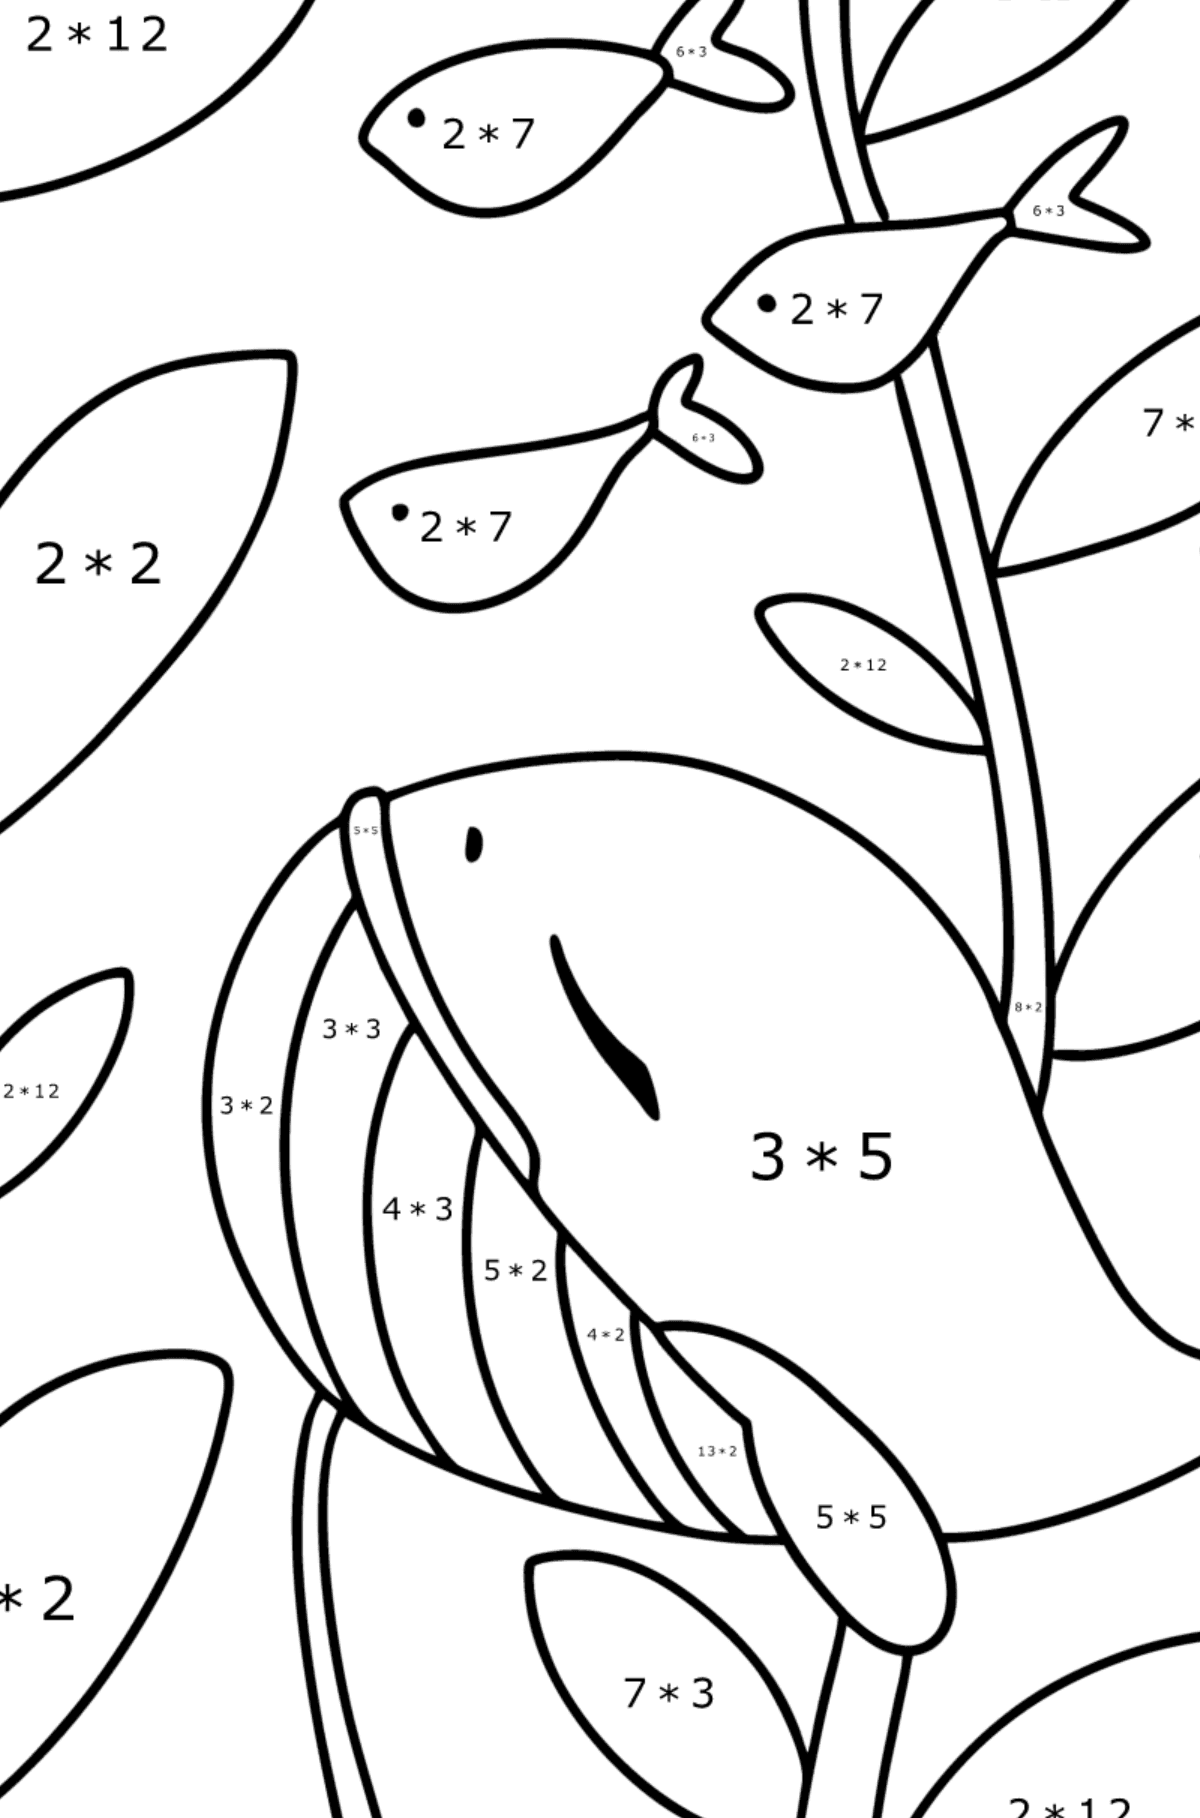 Whale baby coloring page - Math Coloring - Multiplication for Kids